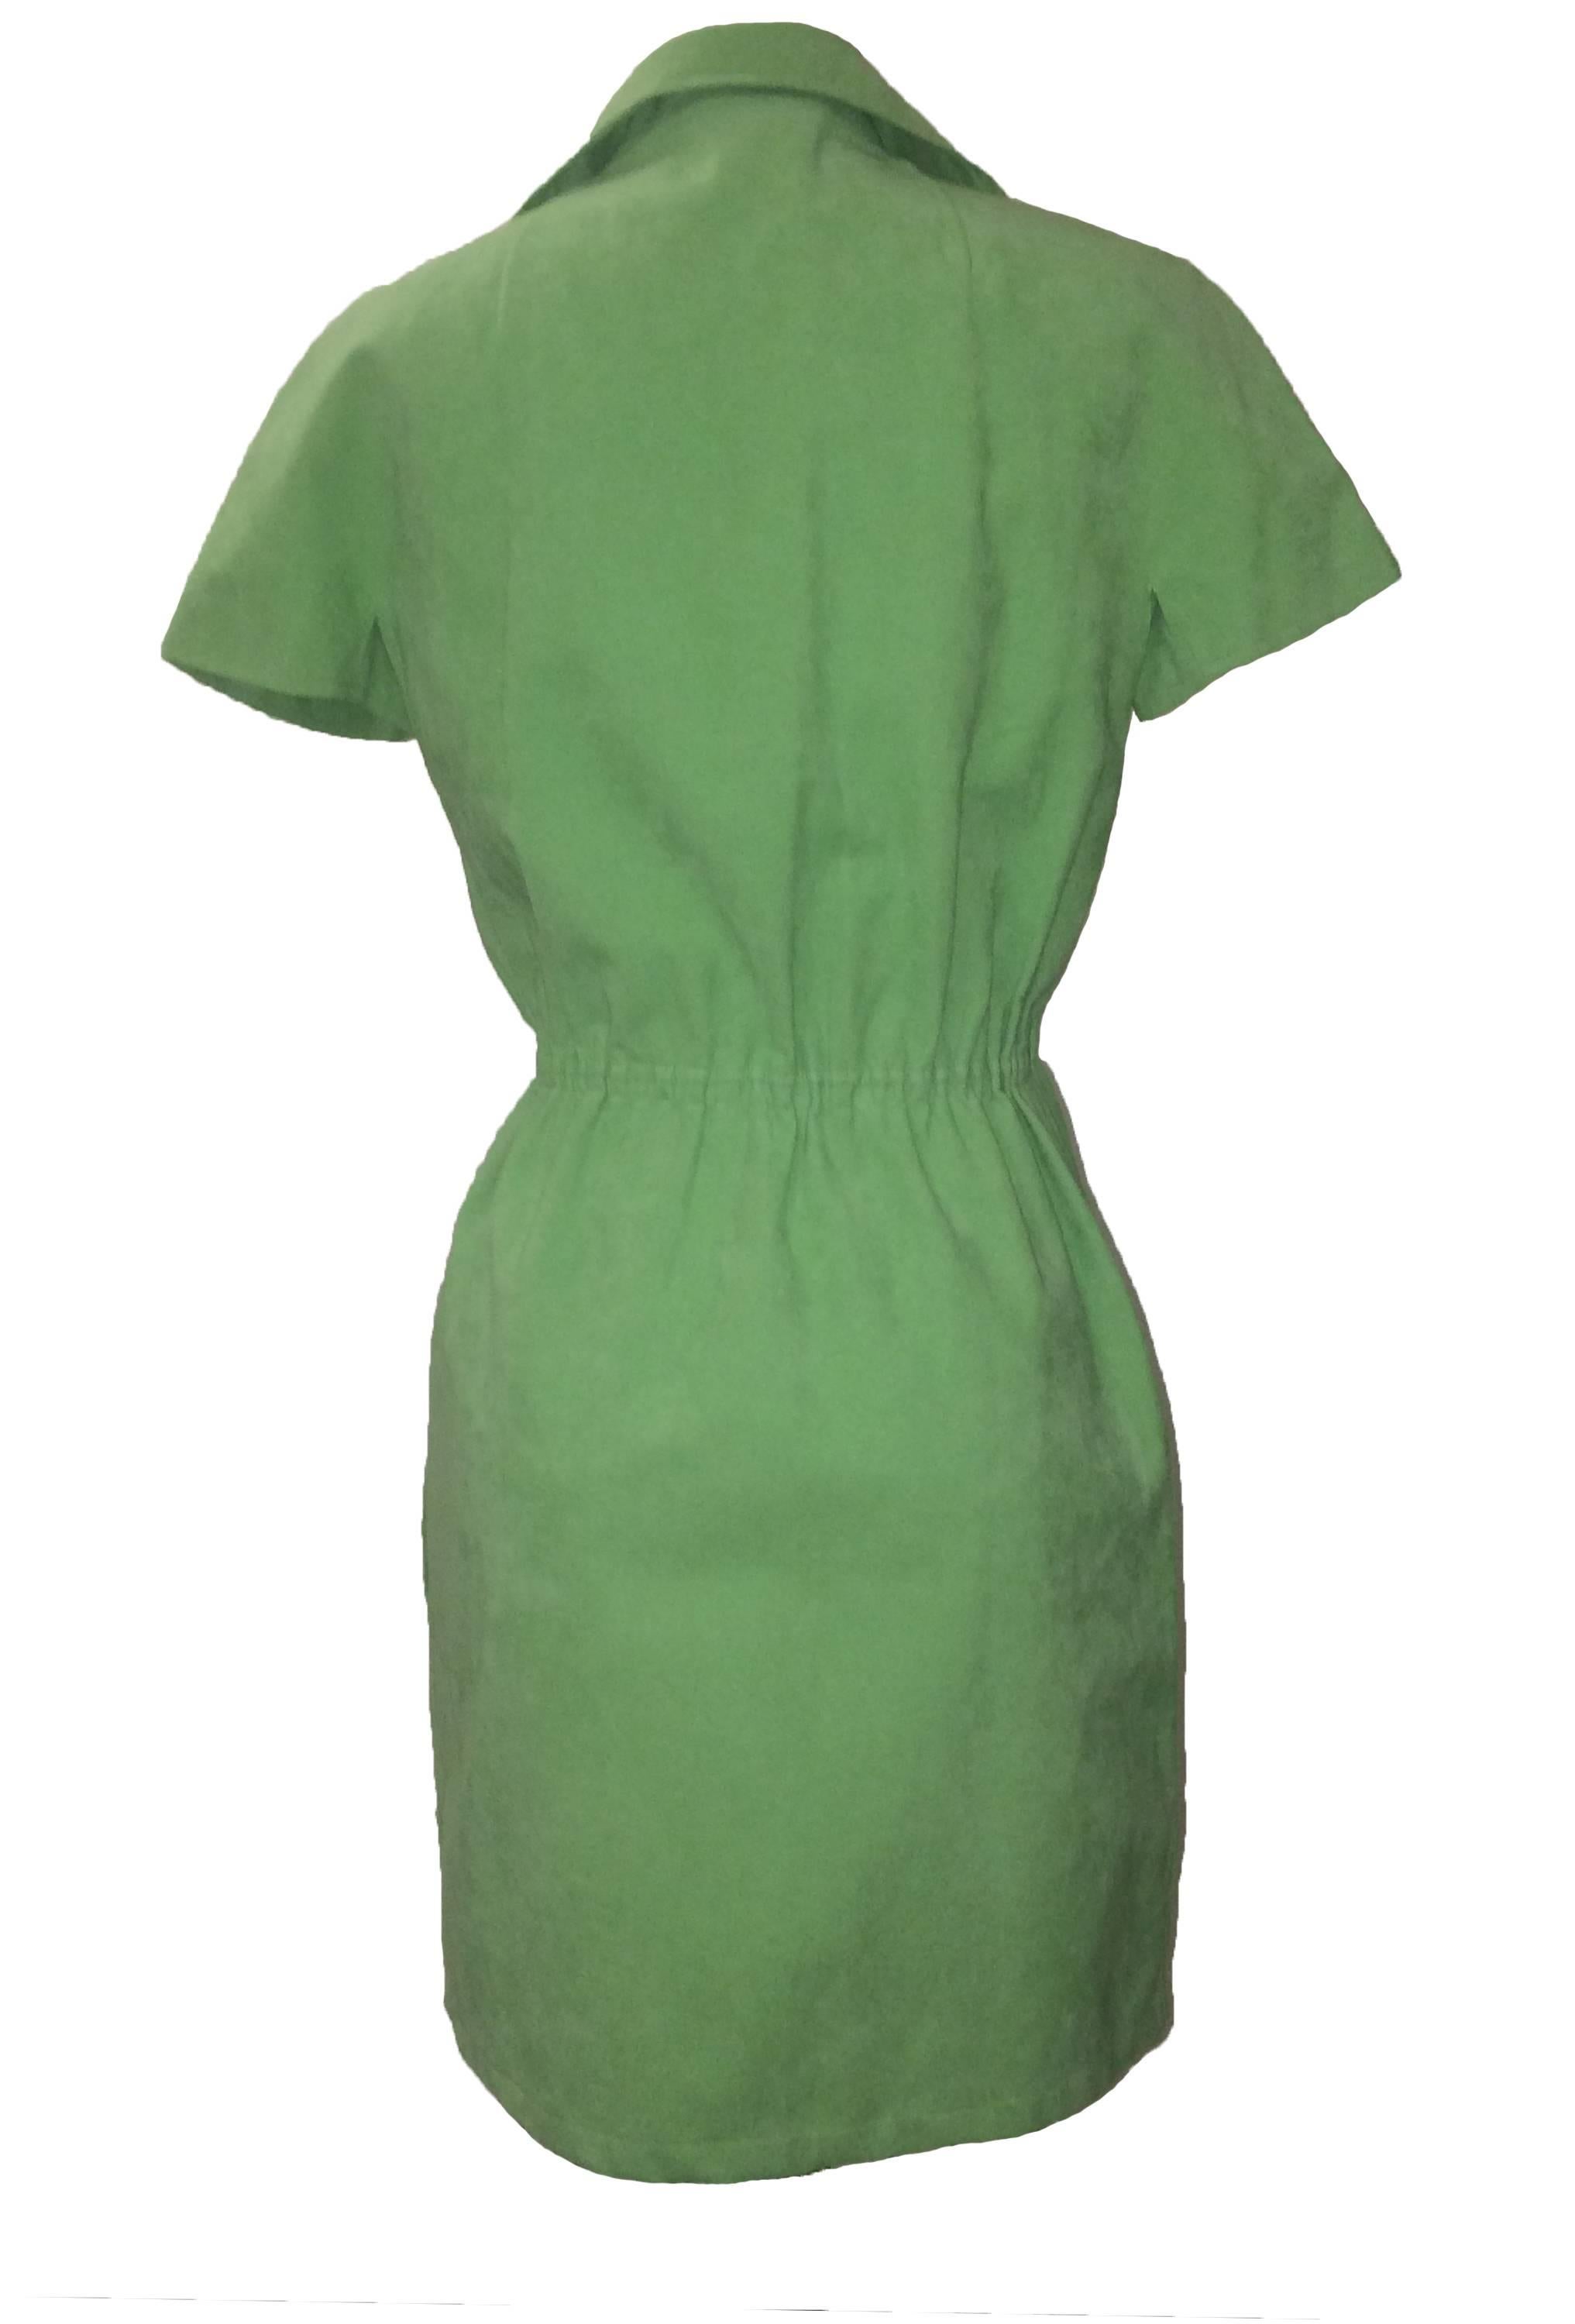 Halston 1970s short sleeve mint green ultra suede wrap style dress. Ties at interior and hooks at exterior.  Elasticized waist, hidden pockets at side seams.

No size label, fits like a S/M.
Bust 36